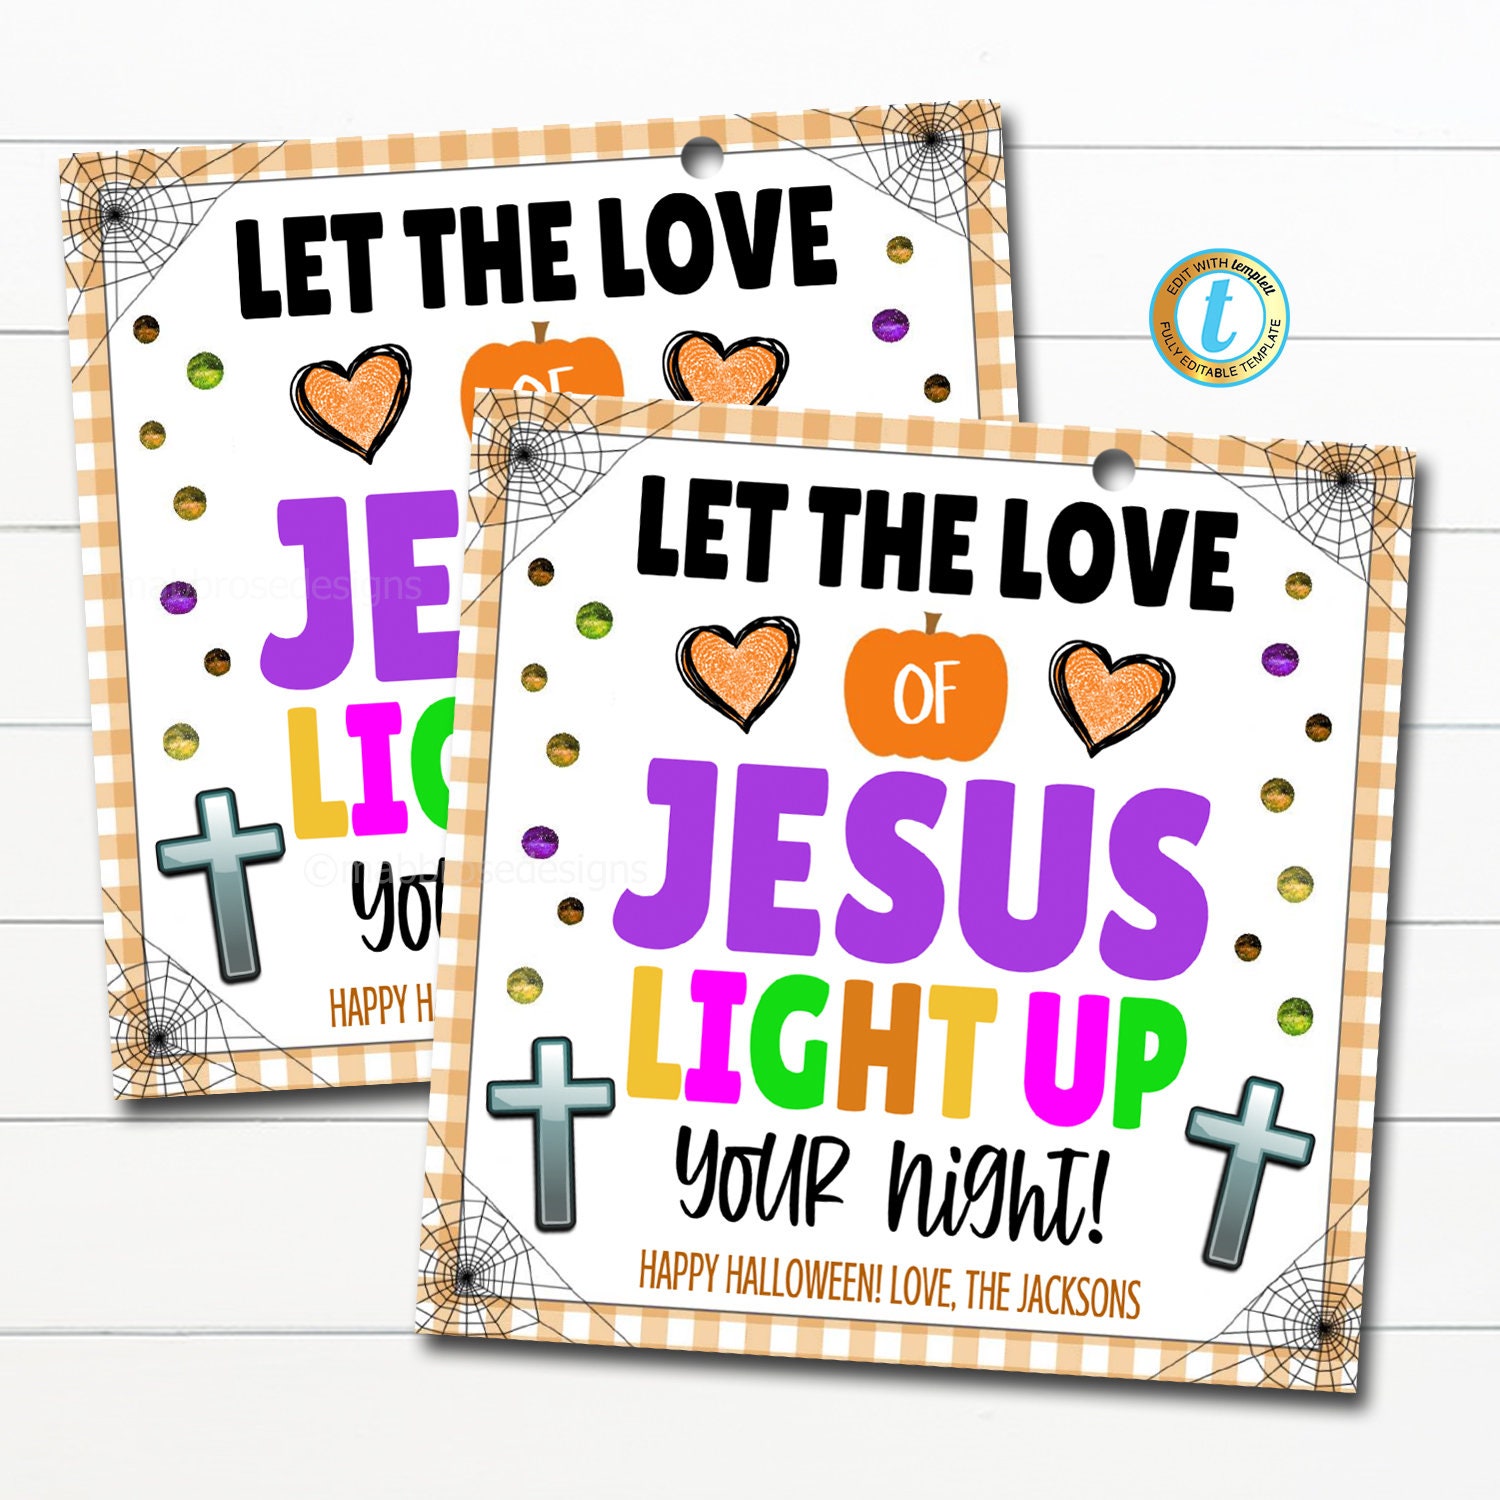 Fall in Love With Jesus Crafts for Kids, Fall Christian Crafts, Finger  Painting Keepsakes, Sunday School Crafts, Homeschool Crafts 